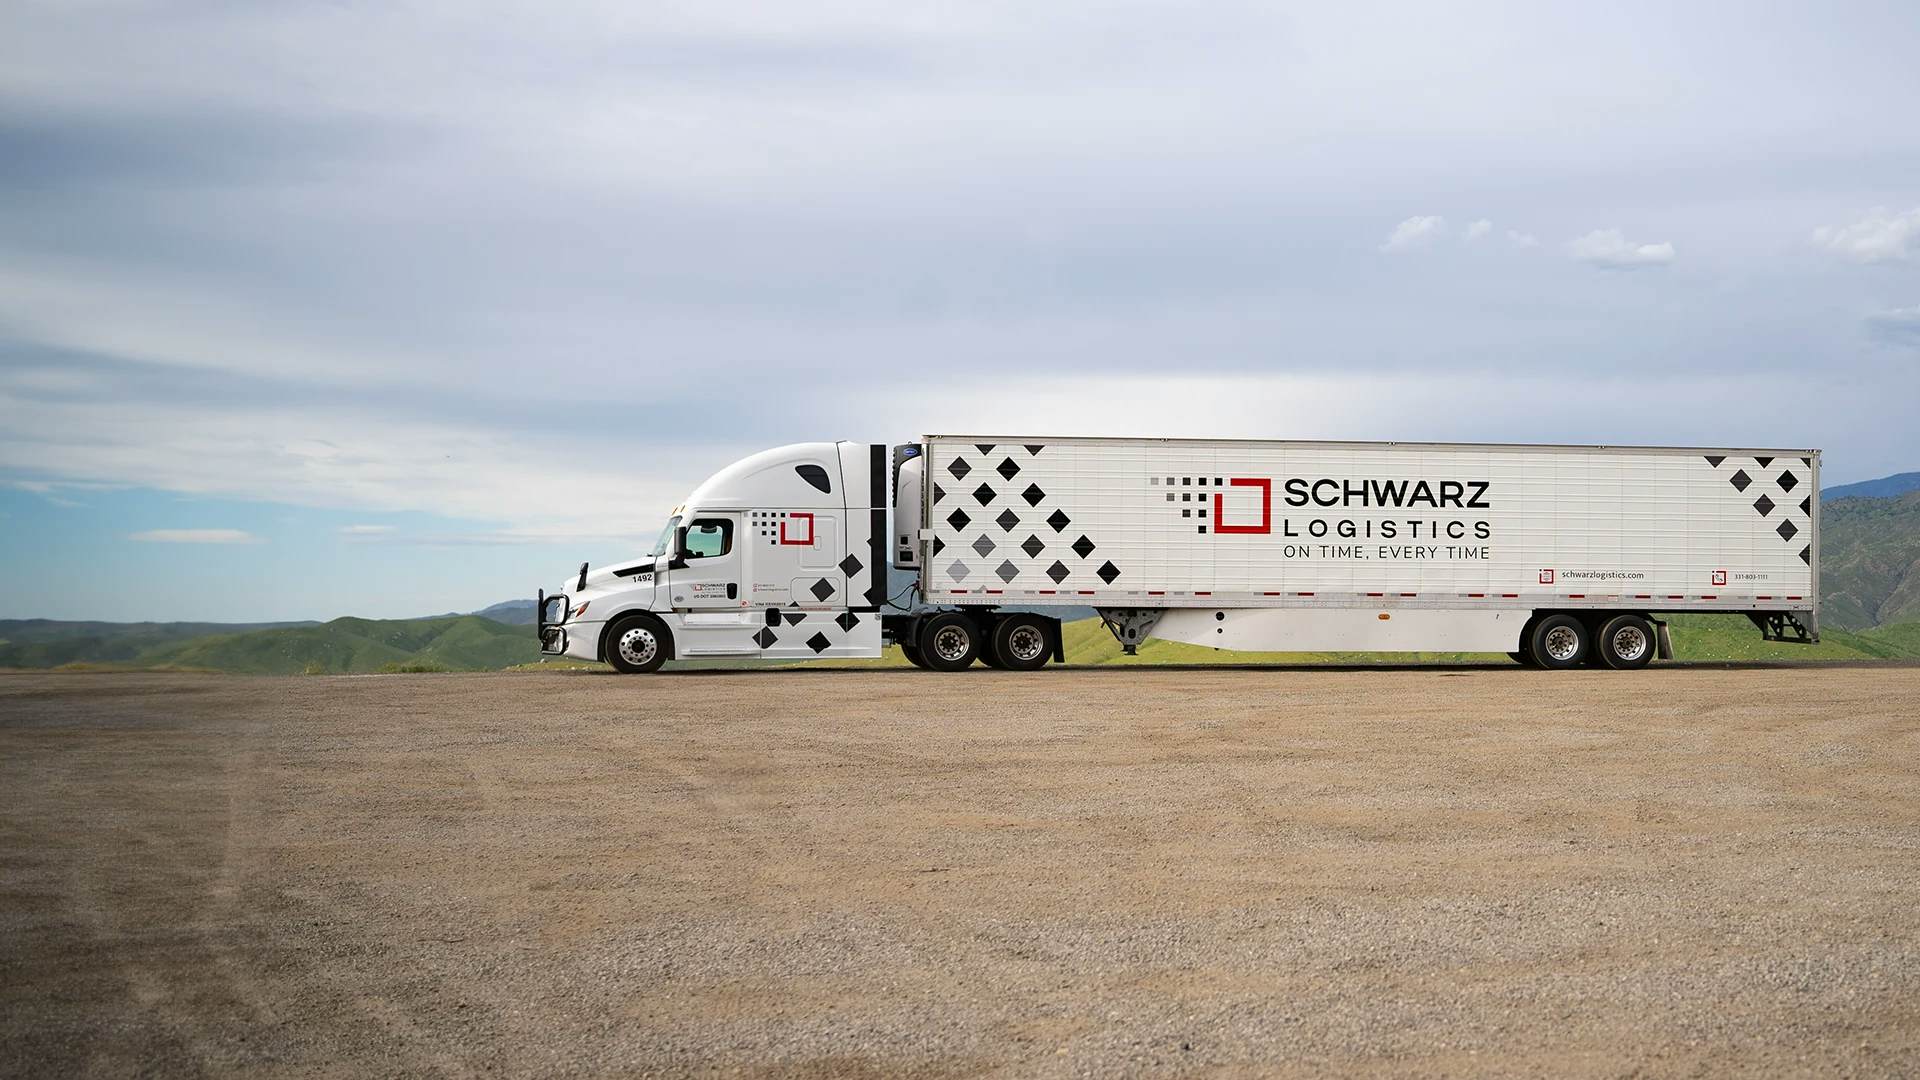 A white semi-truck with a trailer, bearing the name "SCHWARZ LOGISTICS" and the slogan "ON TIME. EVERY TIME." The trailer's design includes a pattern of black and red diamonds, which makes the branding quite prominent.